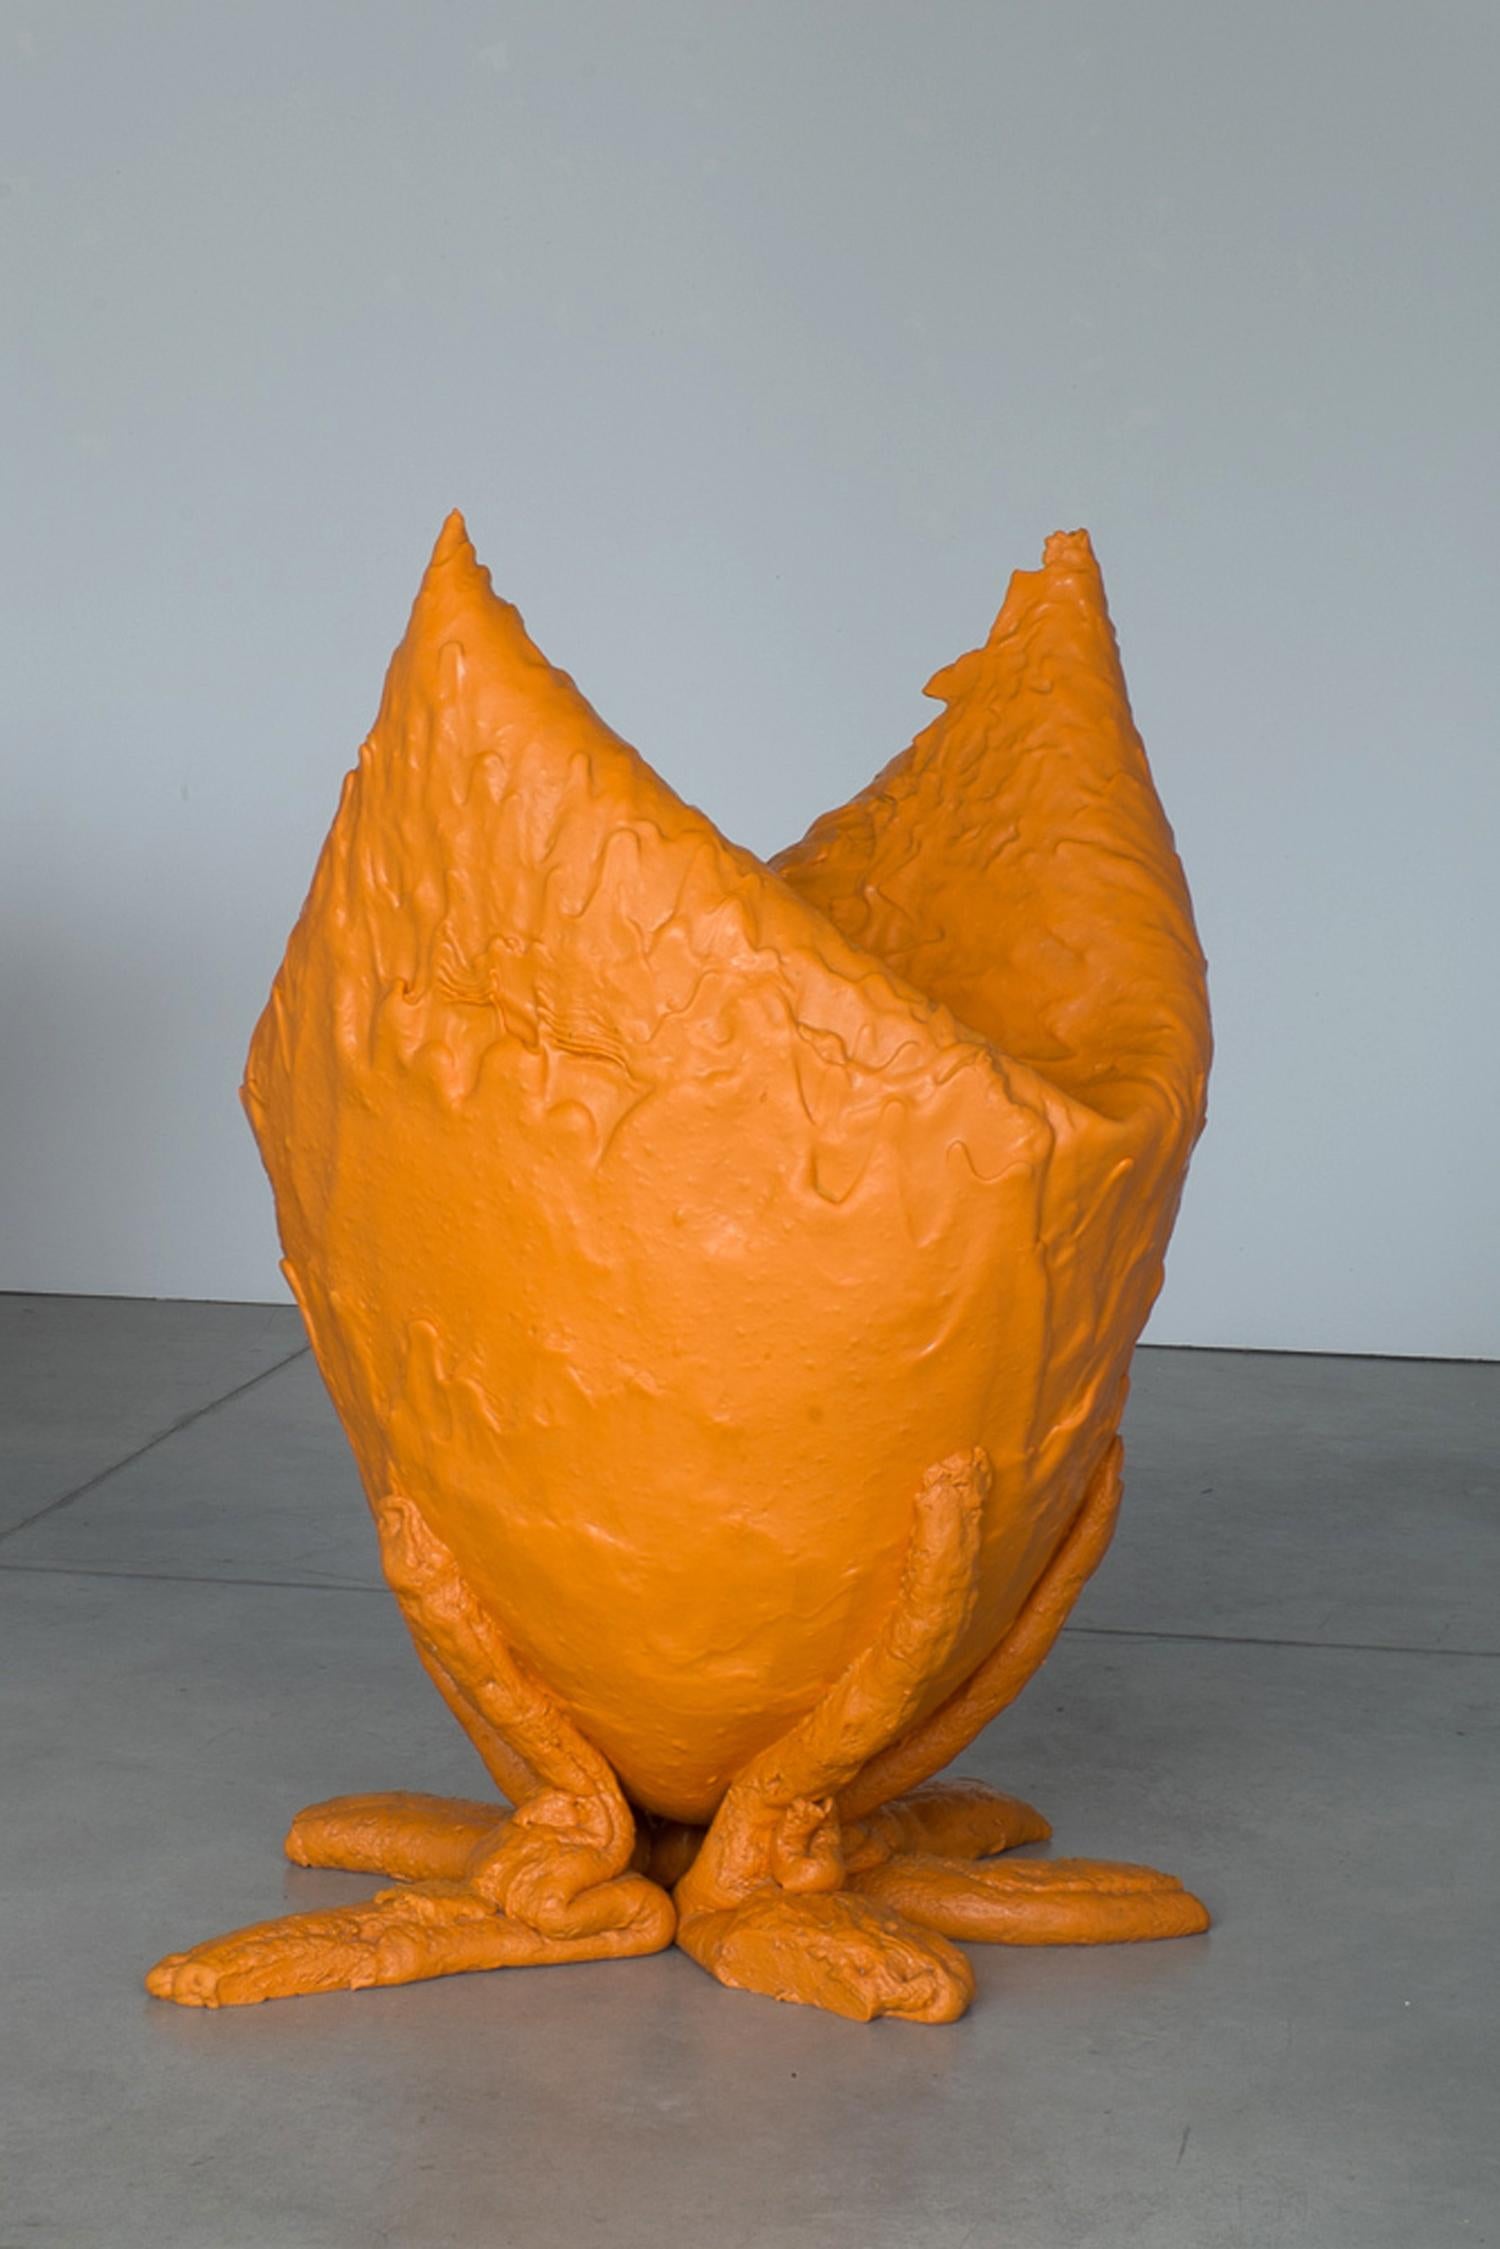 Model XXXL N. 003/2004 Vase by Gaetano Pesce, 2004, Orange, Limited Edition In Good Condition For Sale In barasso, IT